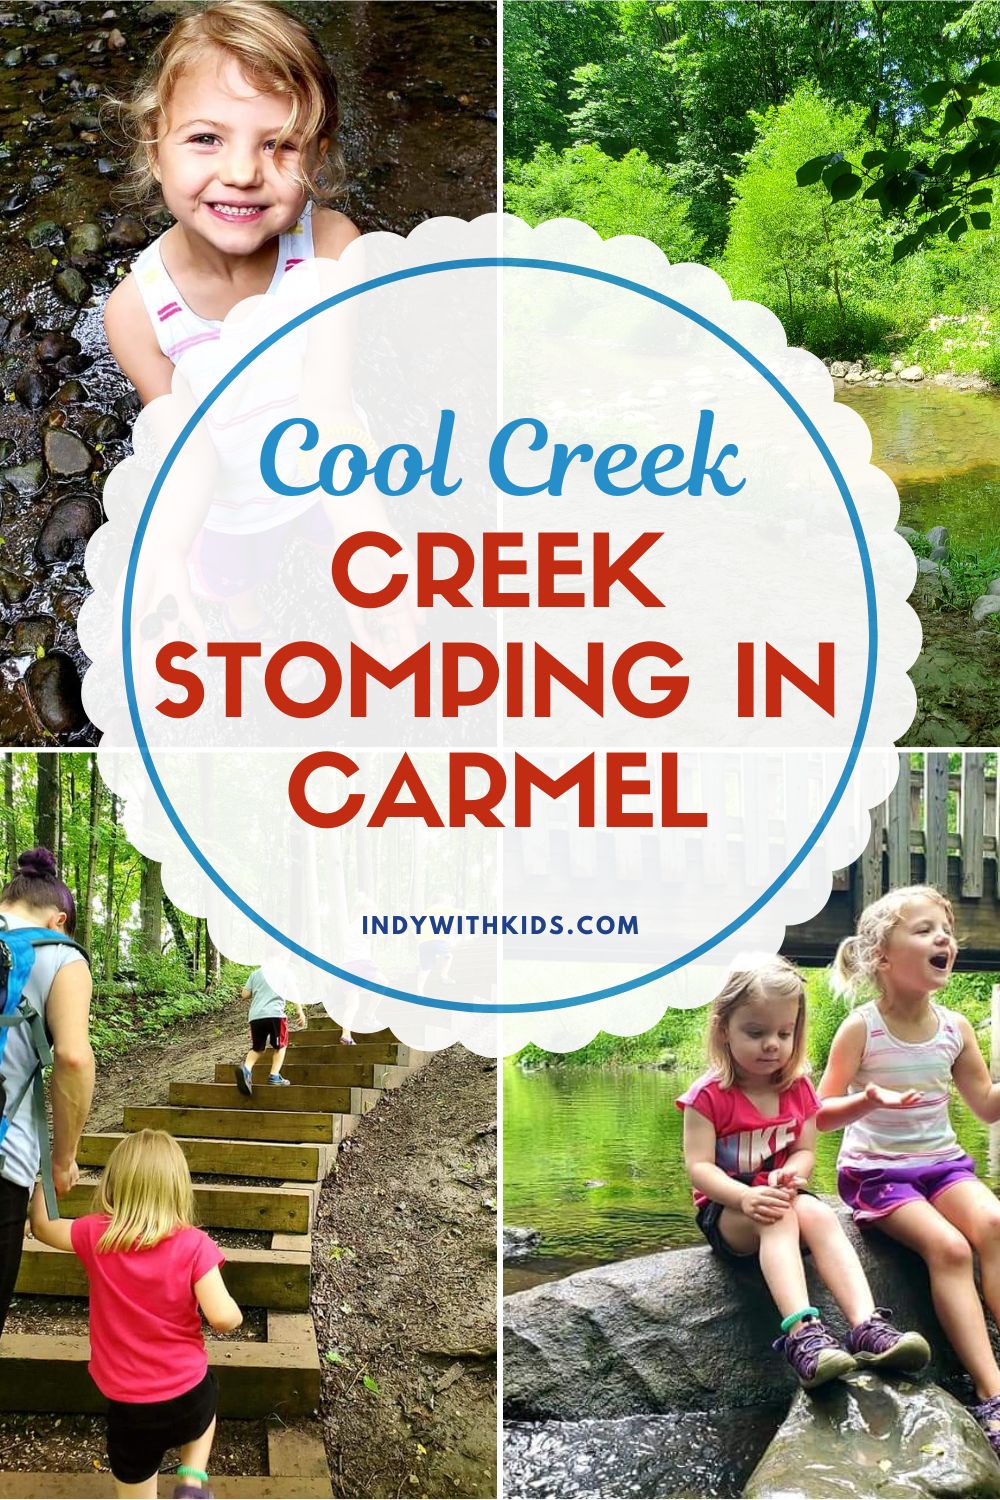 Cool Creek Park in Carmel is an ideal destination for creek stomping.